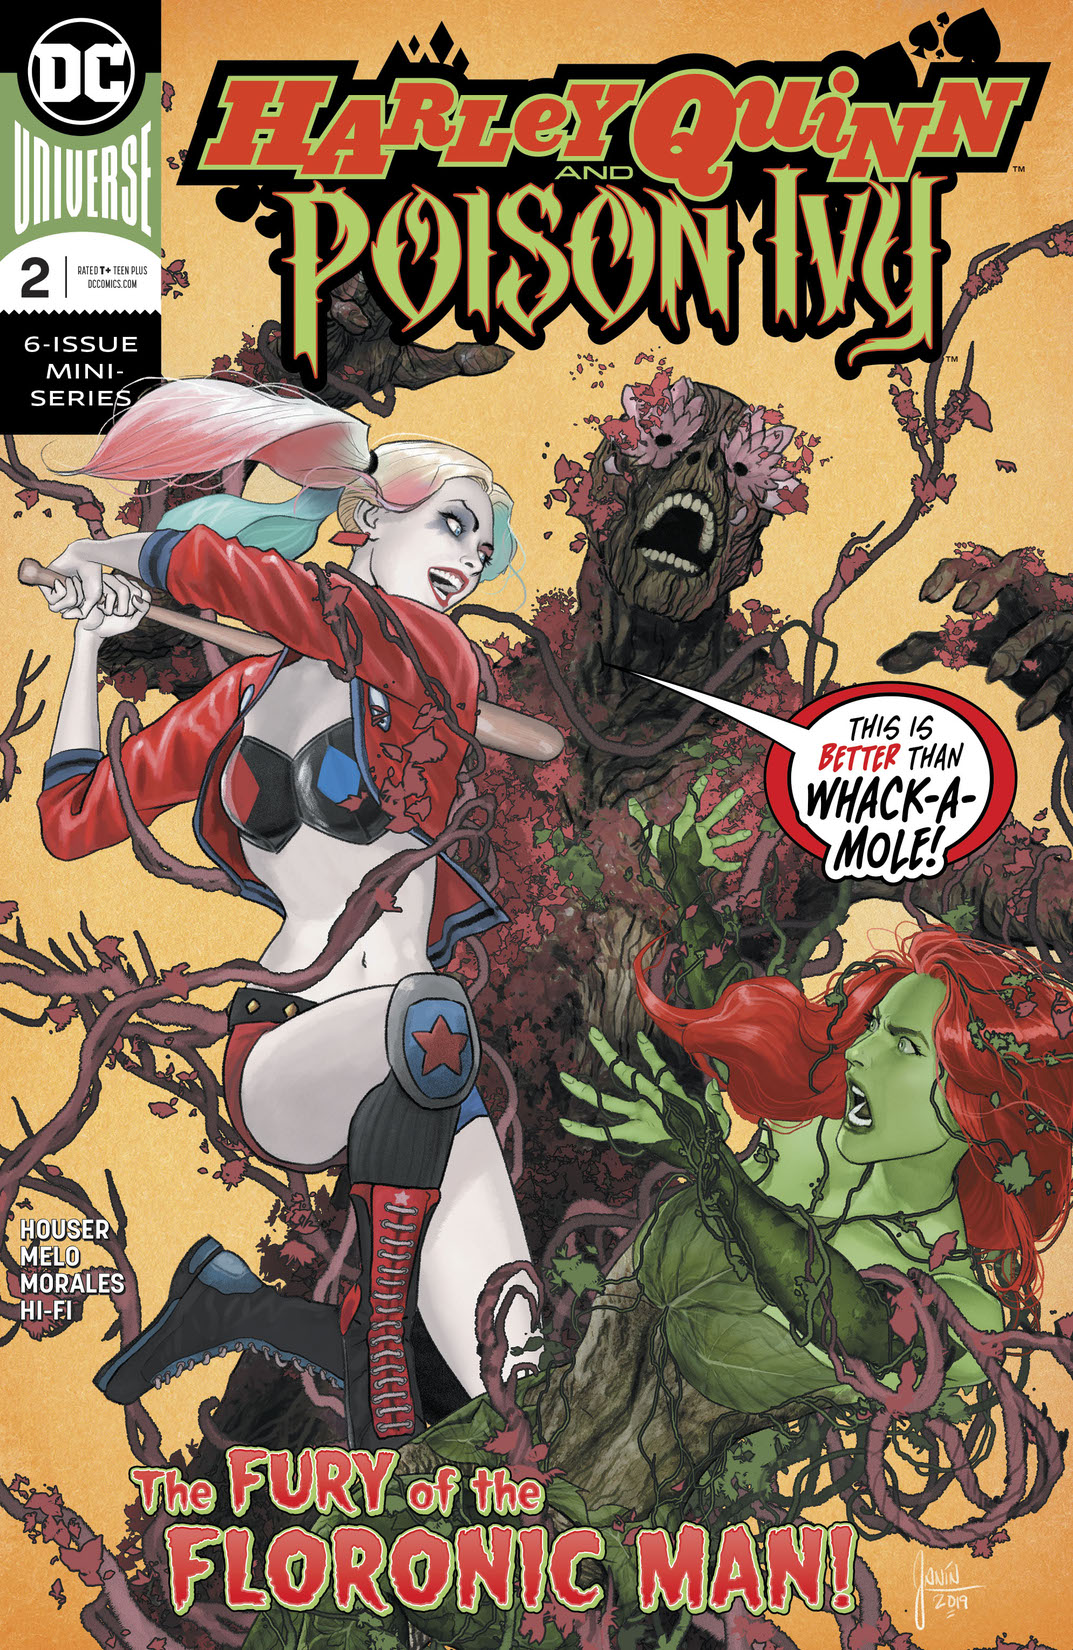 Harley Quinn & Poison Ivy #2 preview images